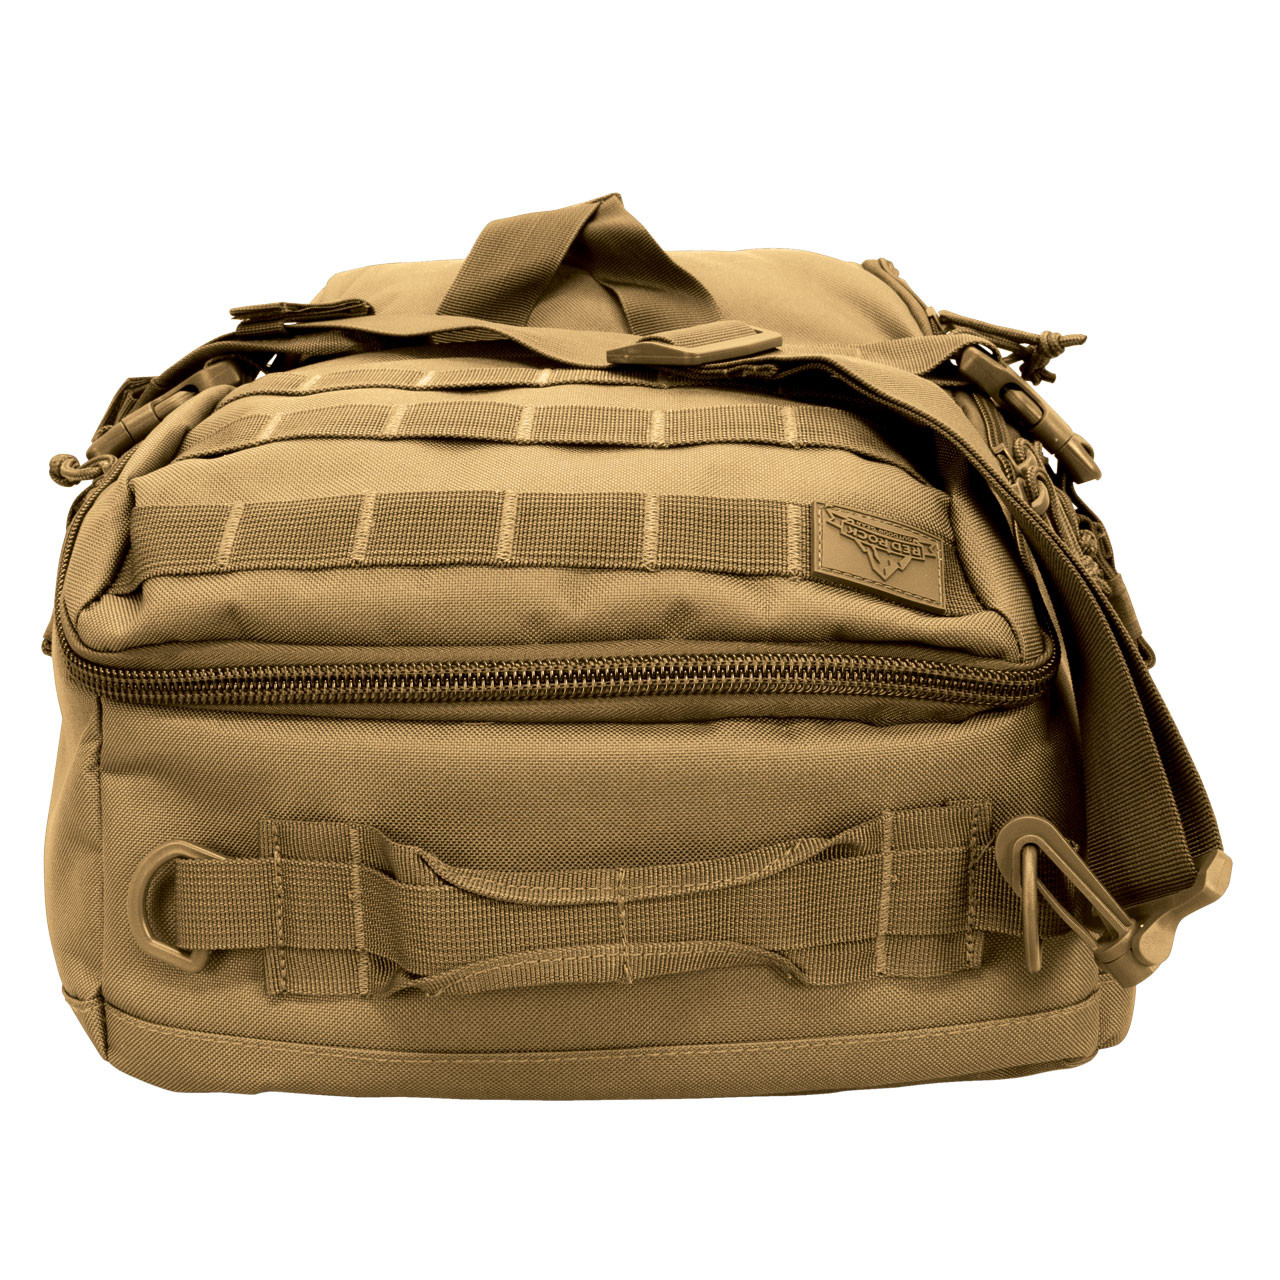 Traveler Duffle Pack - Military Backpack - Red Rock Outdoor Gear